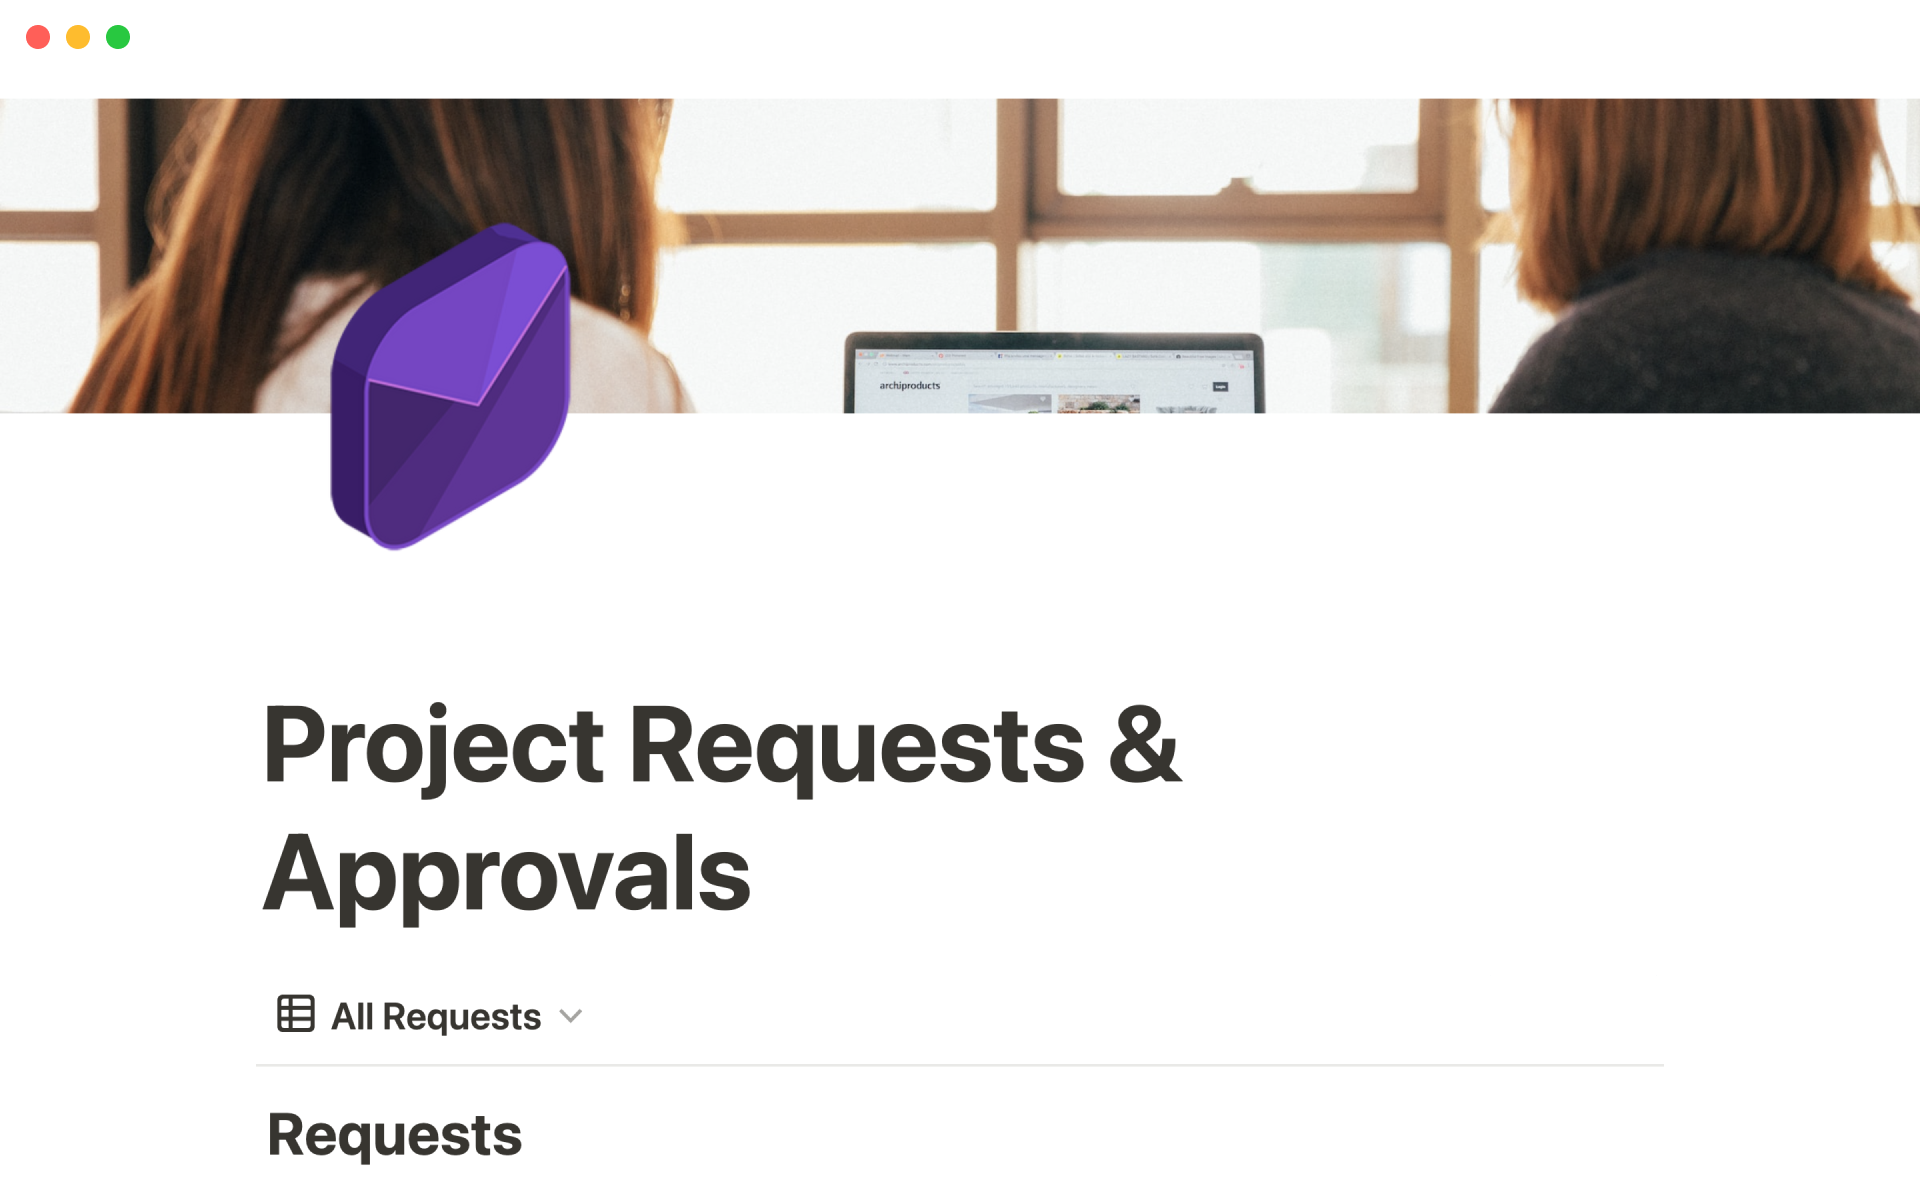 Manage all incoming project requests and approvals in one place.